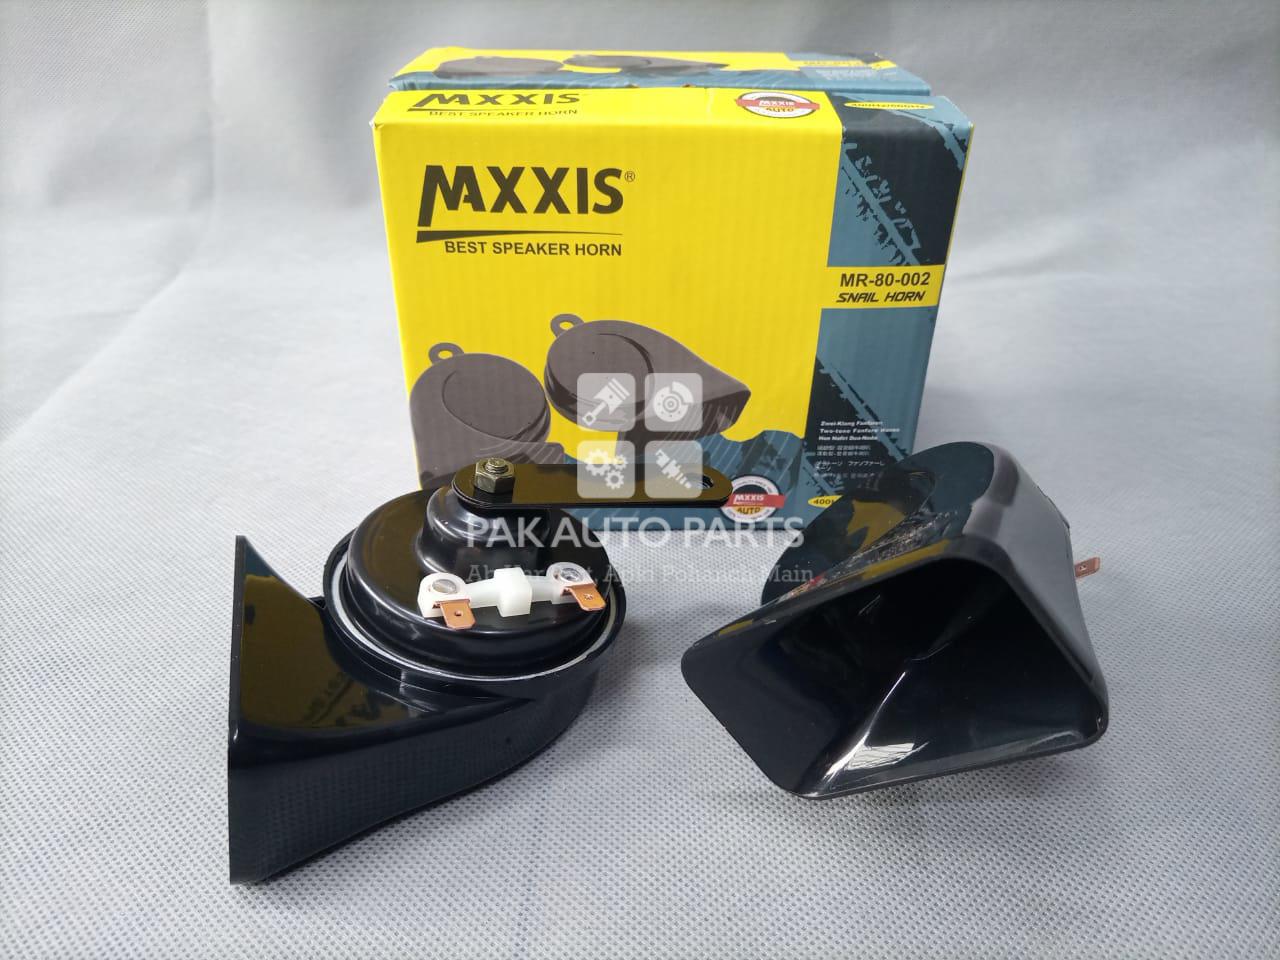 Picture of MXXIS Best Speaker Horn (MR-80-002)